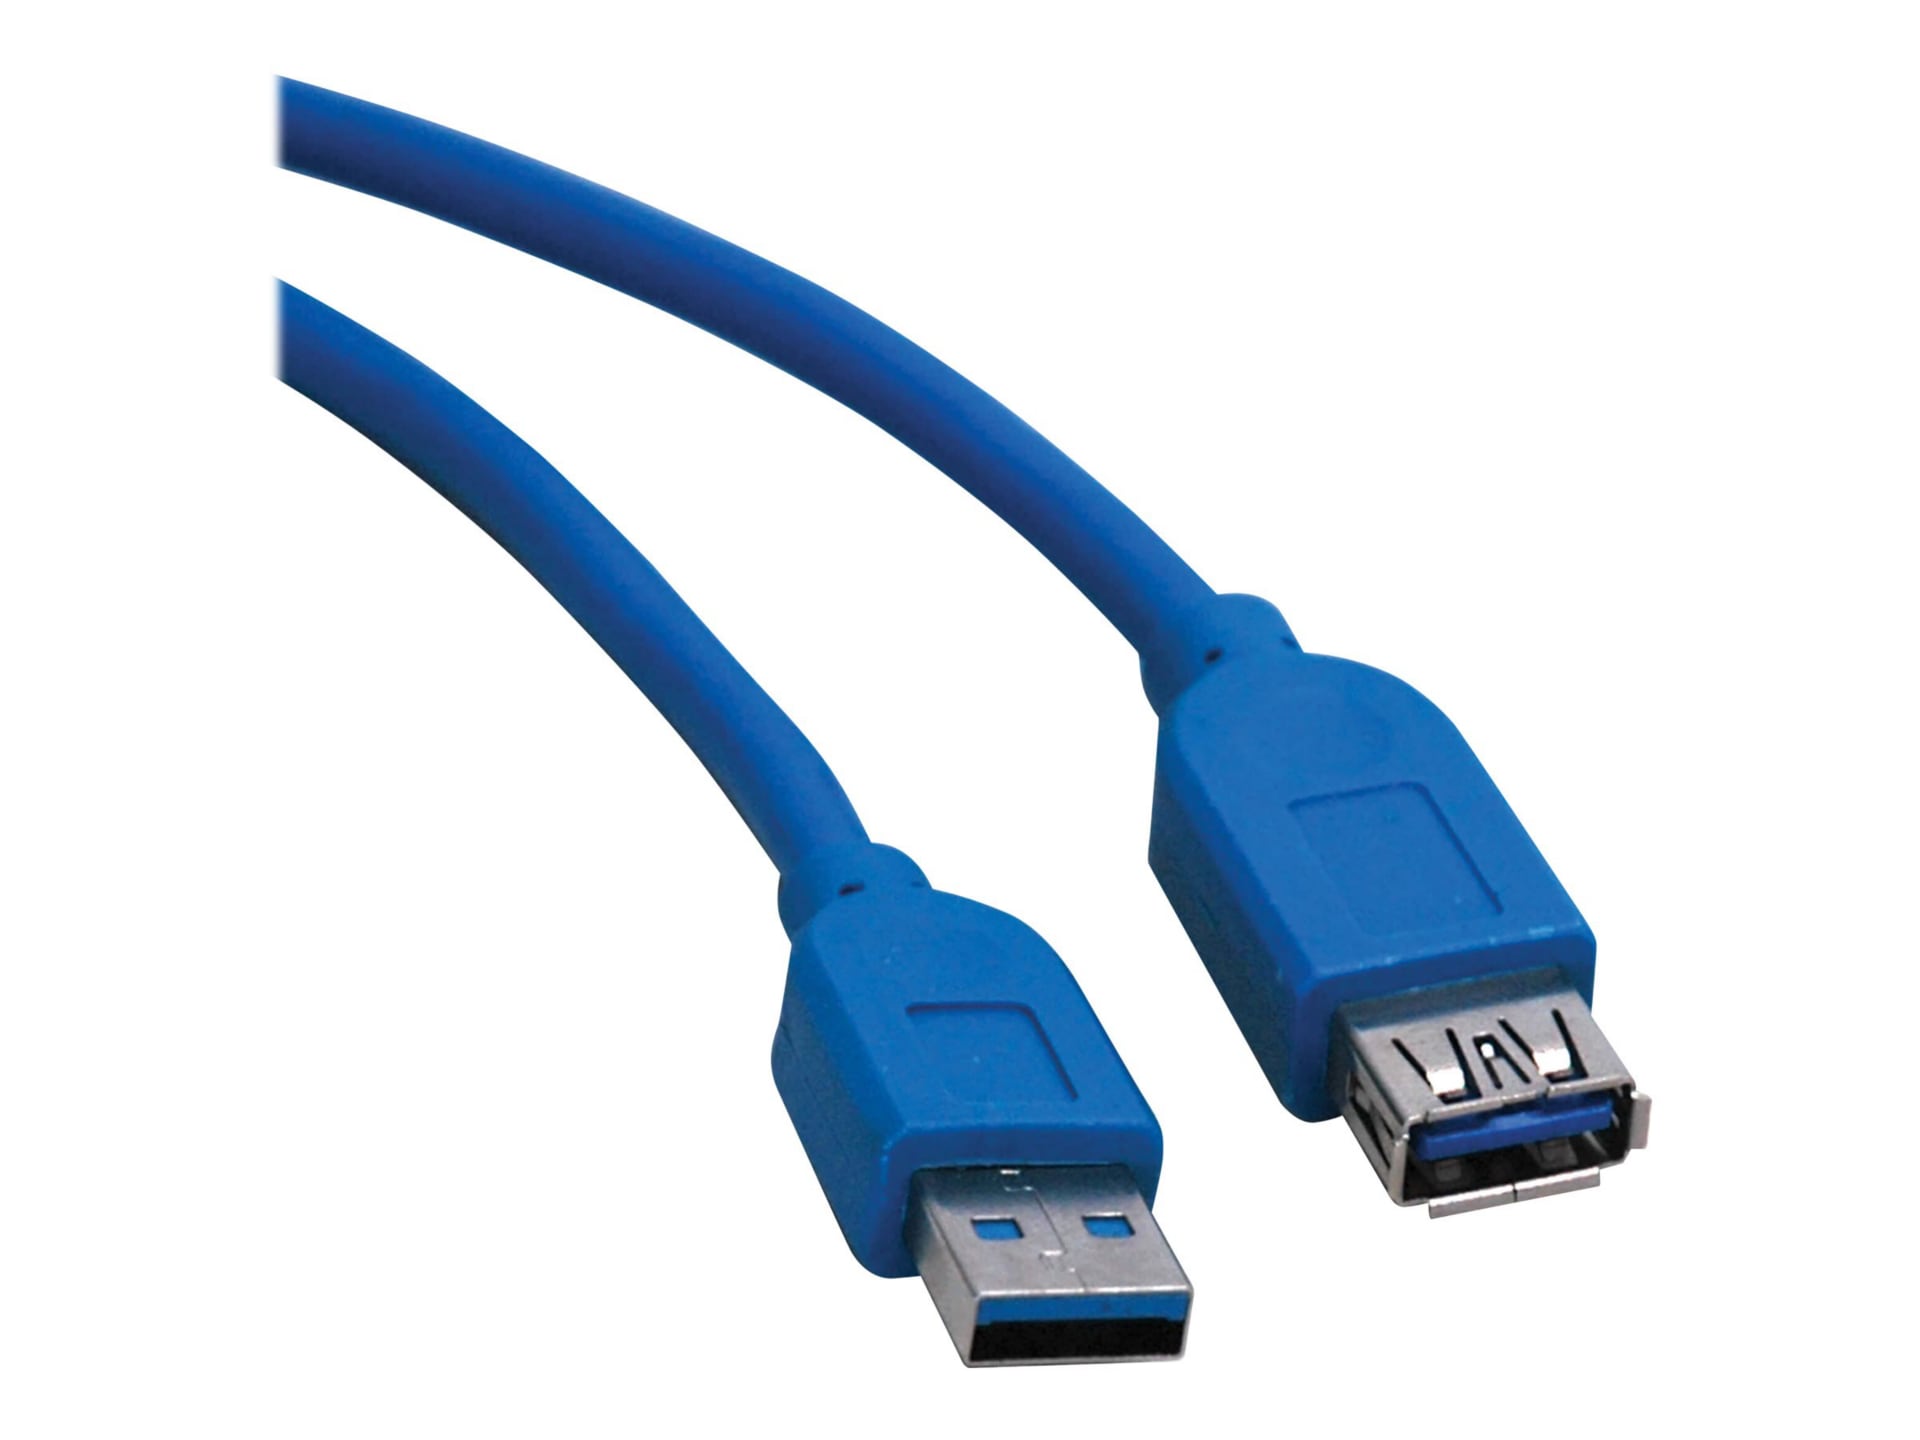 Eaton Tripp Lite Series USB 3.0 SuperSpeed Extension Cable (A M/F), Blue, 10 ft. (3,05 m) - USB extension cable - USB